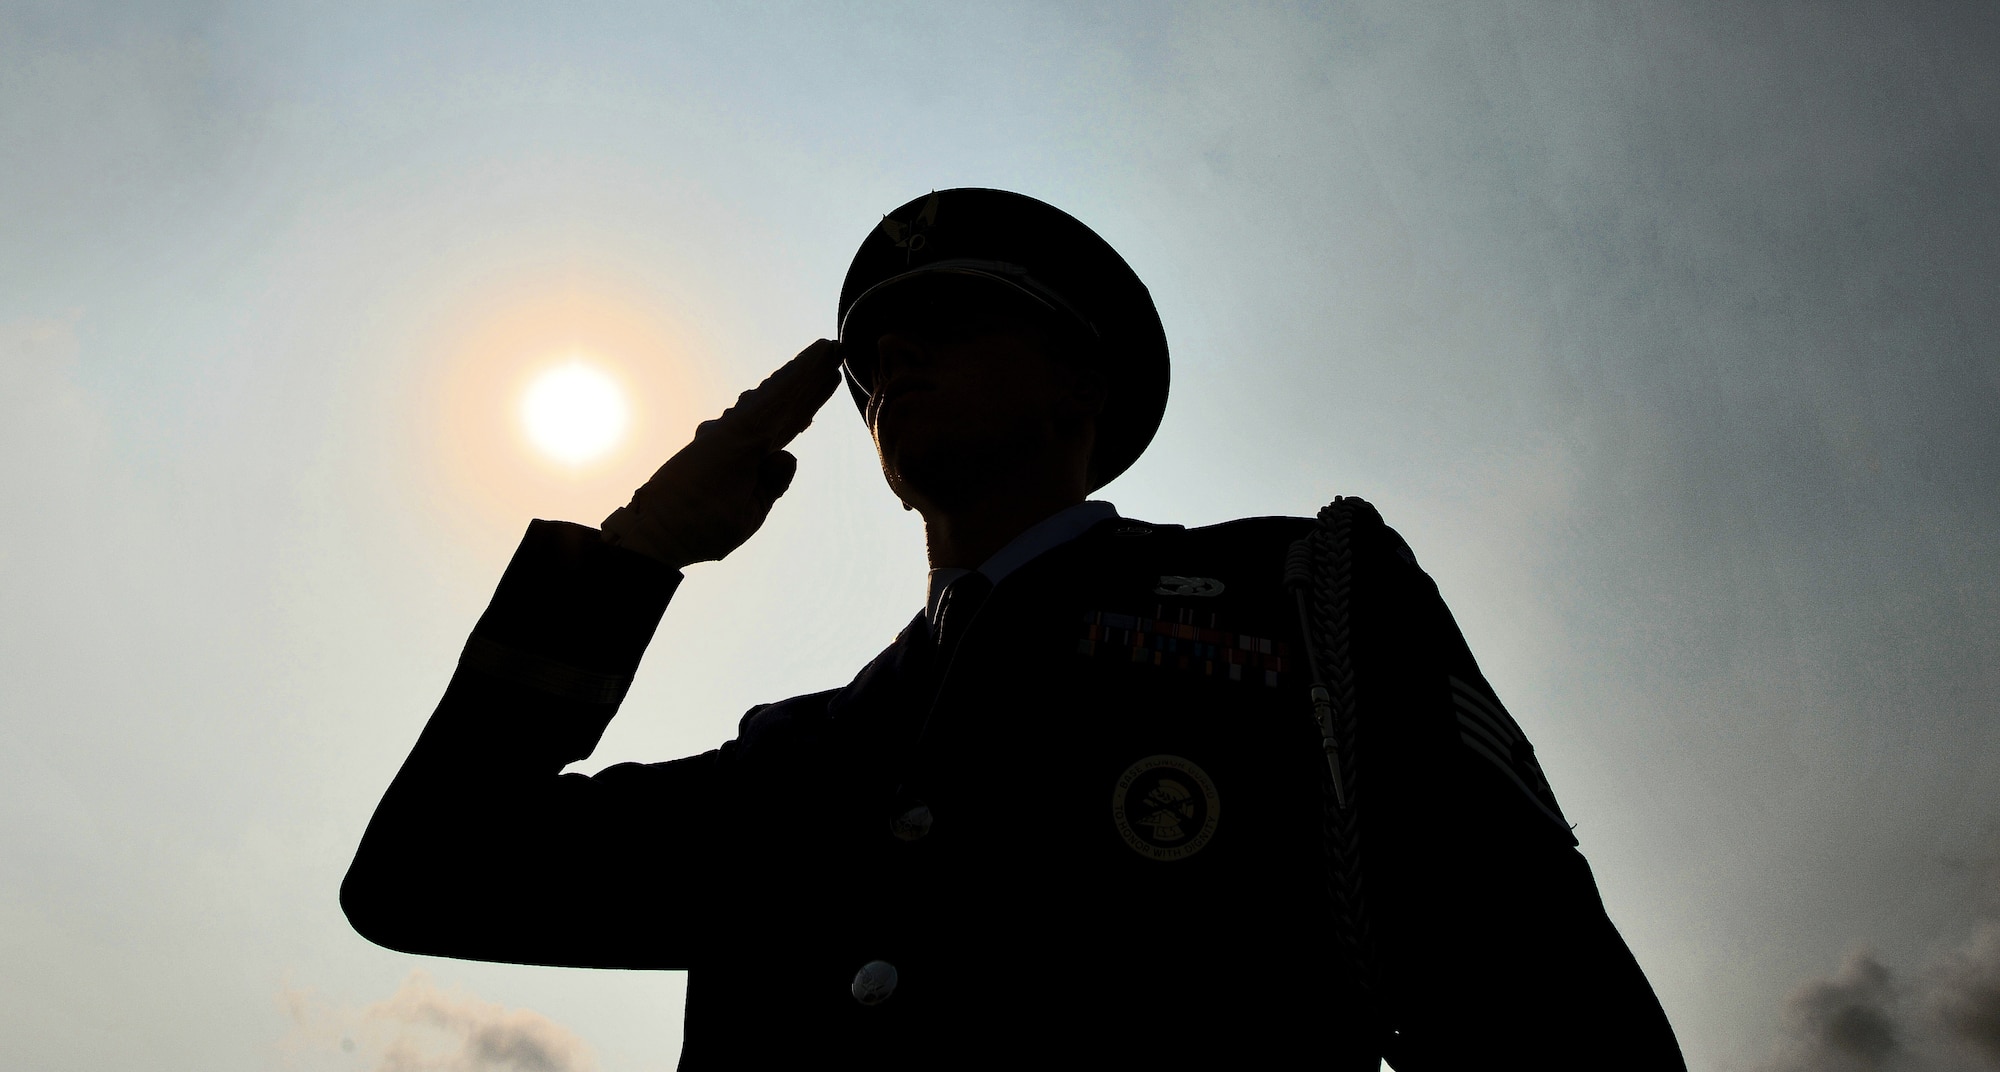 WHITEMAN AIR FORCE BASE, Mo. -- A ceremonial guardsman from the 509th Bomb Wing Honor Guard salutes during the playing of the Star Spangled Banner at a Wing Retreat Ceremony in honor of Memorial Day May 24, 2012. Memorial Day was officially proclaimed in 1868 and became widespread by 1902. It was named a federal holiday in 1971. (U.S. Air Force photo/Senior Airman Nick Wilson) (Released) 